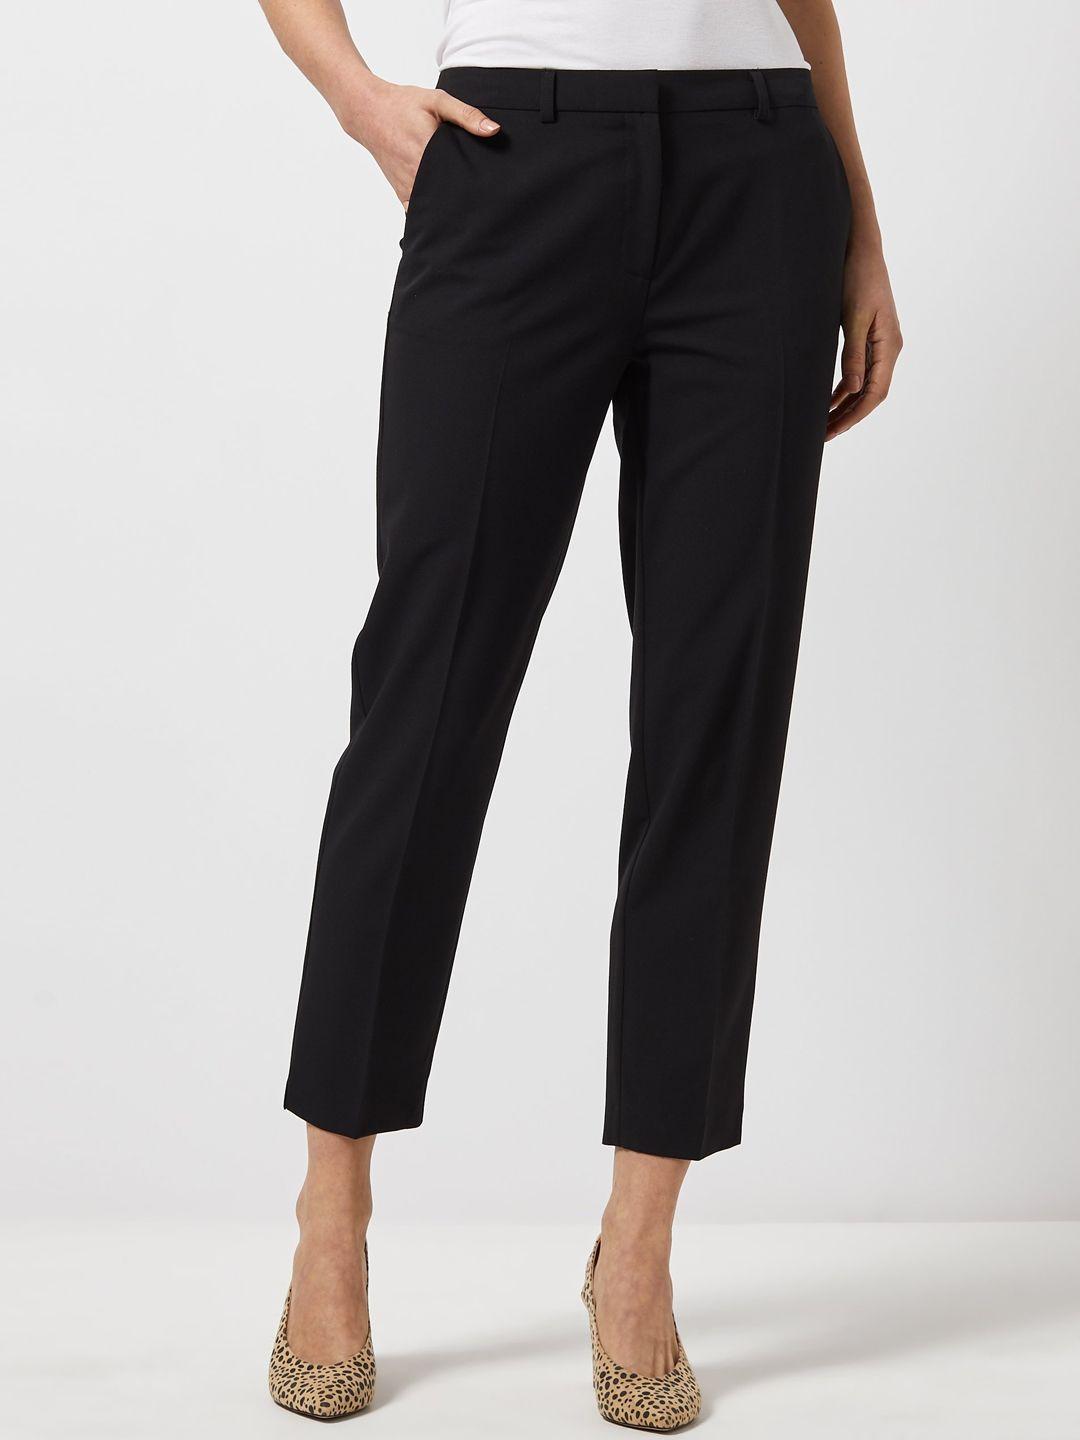 dorothy perkins women black regular fit solid cropped formal trousers